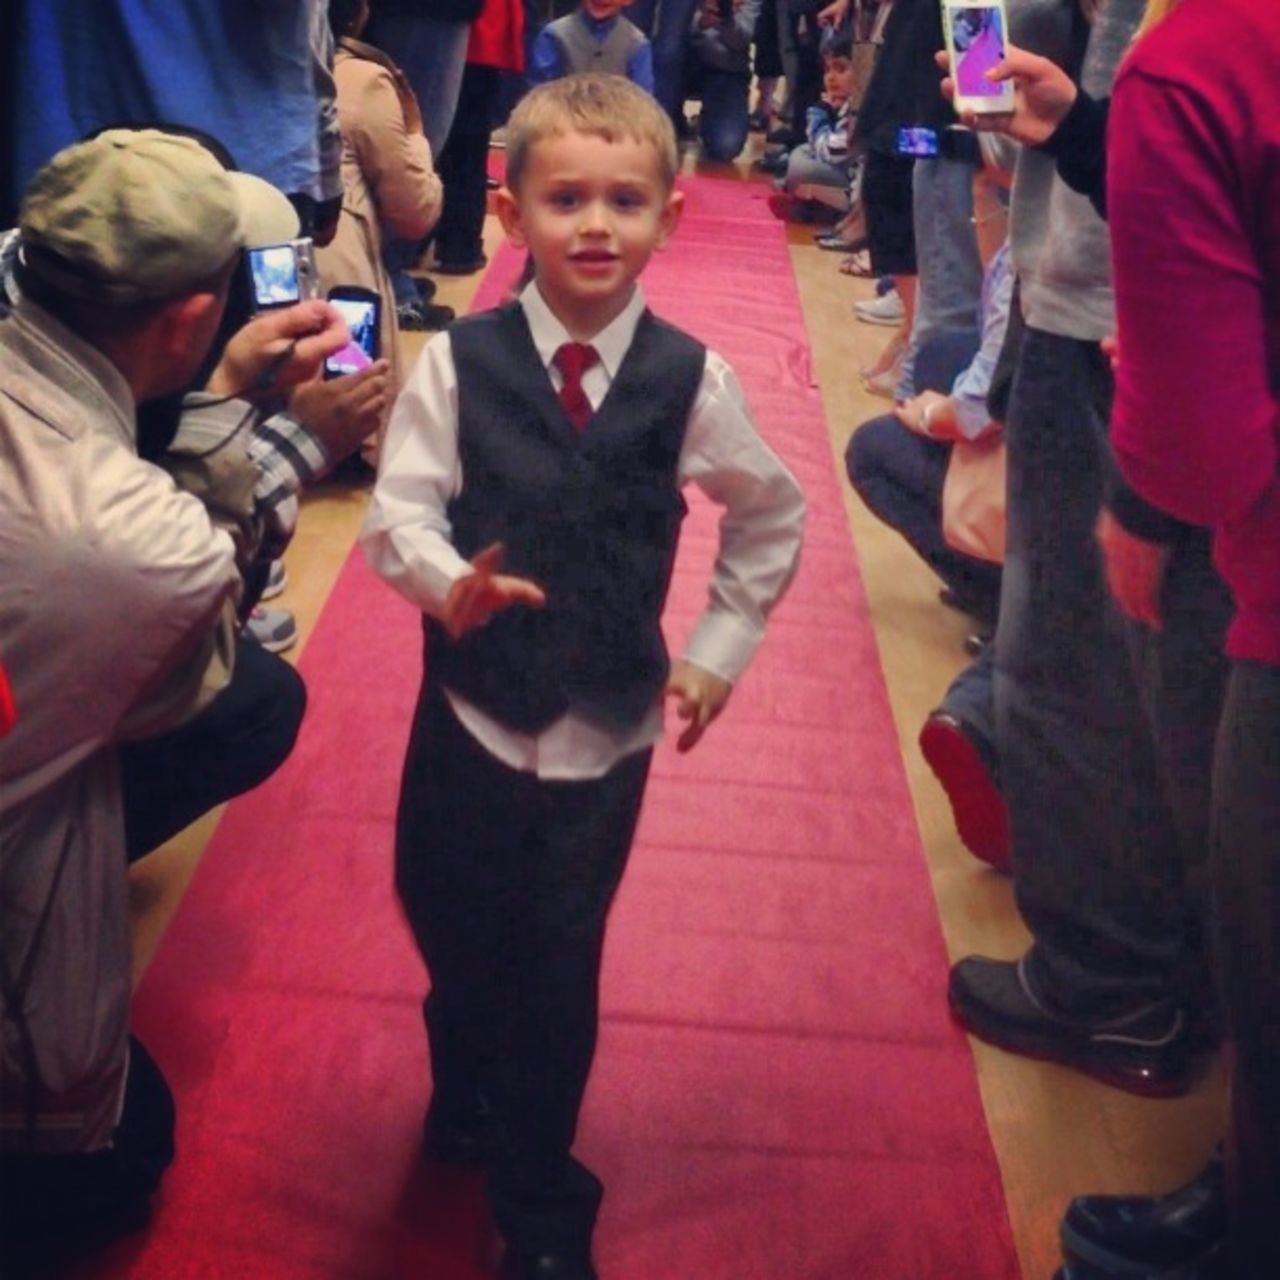 Turns out lots of preschools have proms! <a href="http://ireport.cnn.com/docs/DOC-984577">Calvin Coursen</a> struts the red carpet at his preschool prom at Kiddie Academy of Eatontown in Eatontown, New Jersey. "I personally loved seeing my son dressed up and so excited to be with all his friends," said mom Gwendolyn Coursen. 